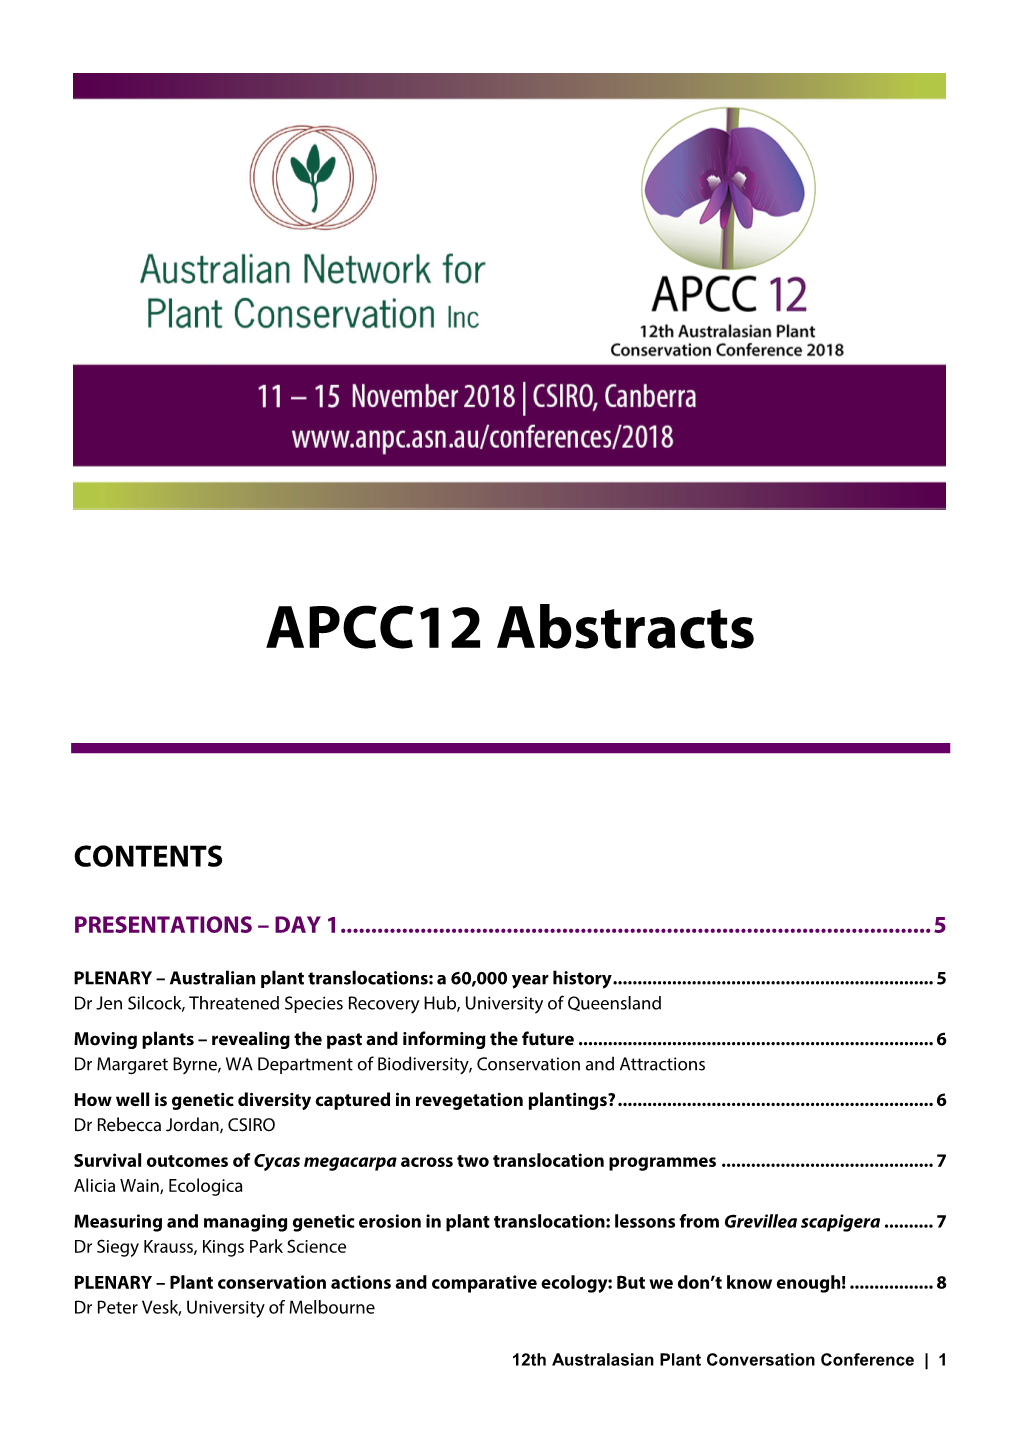 APCC12 Abstracts